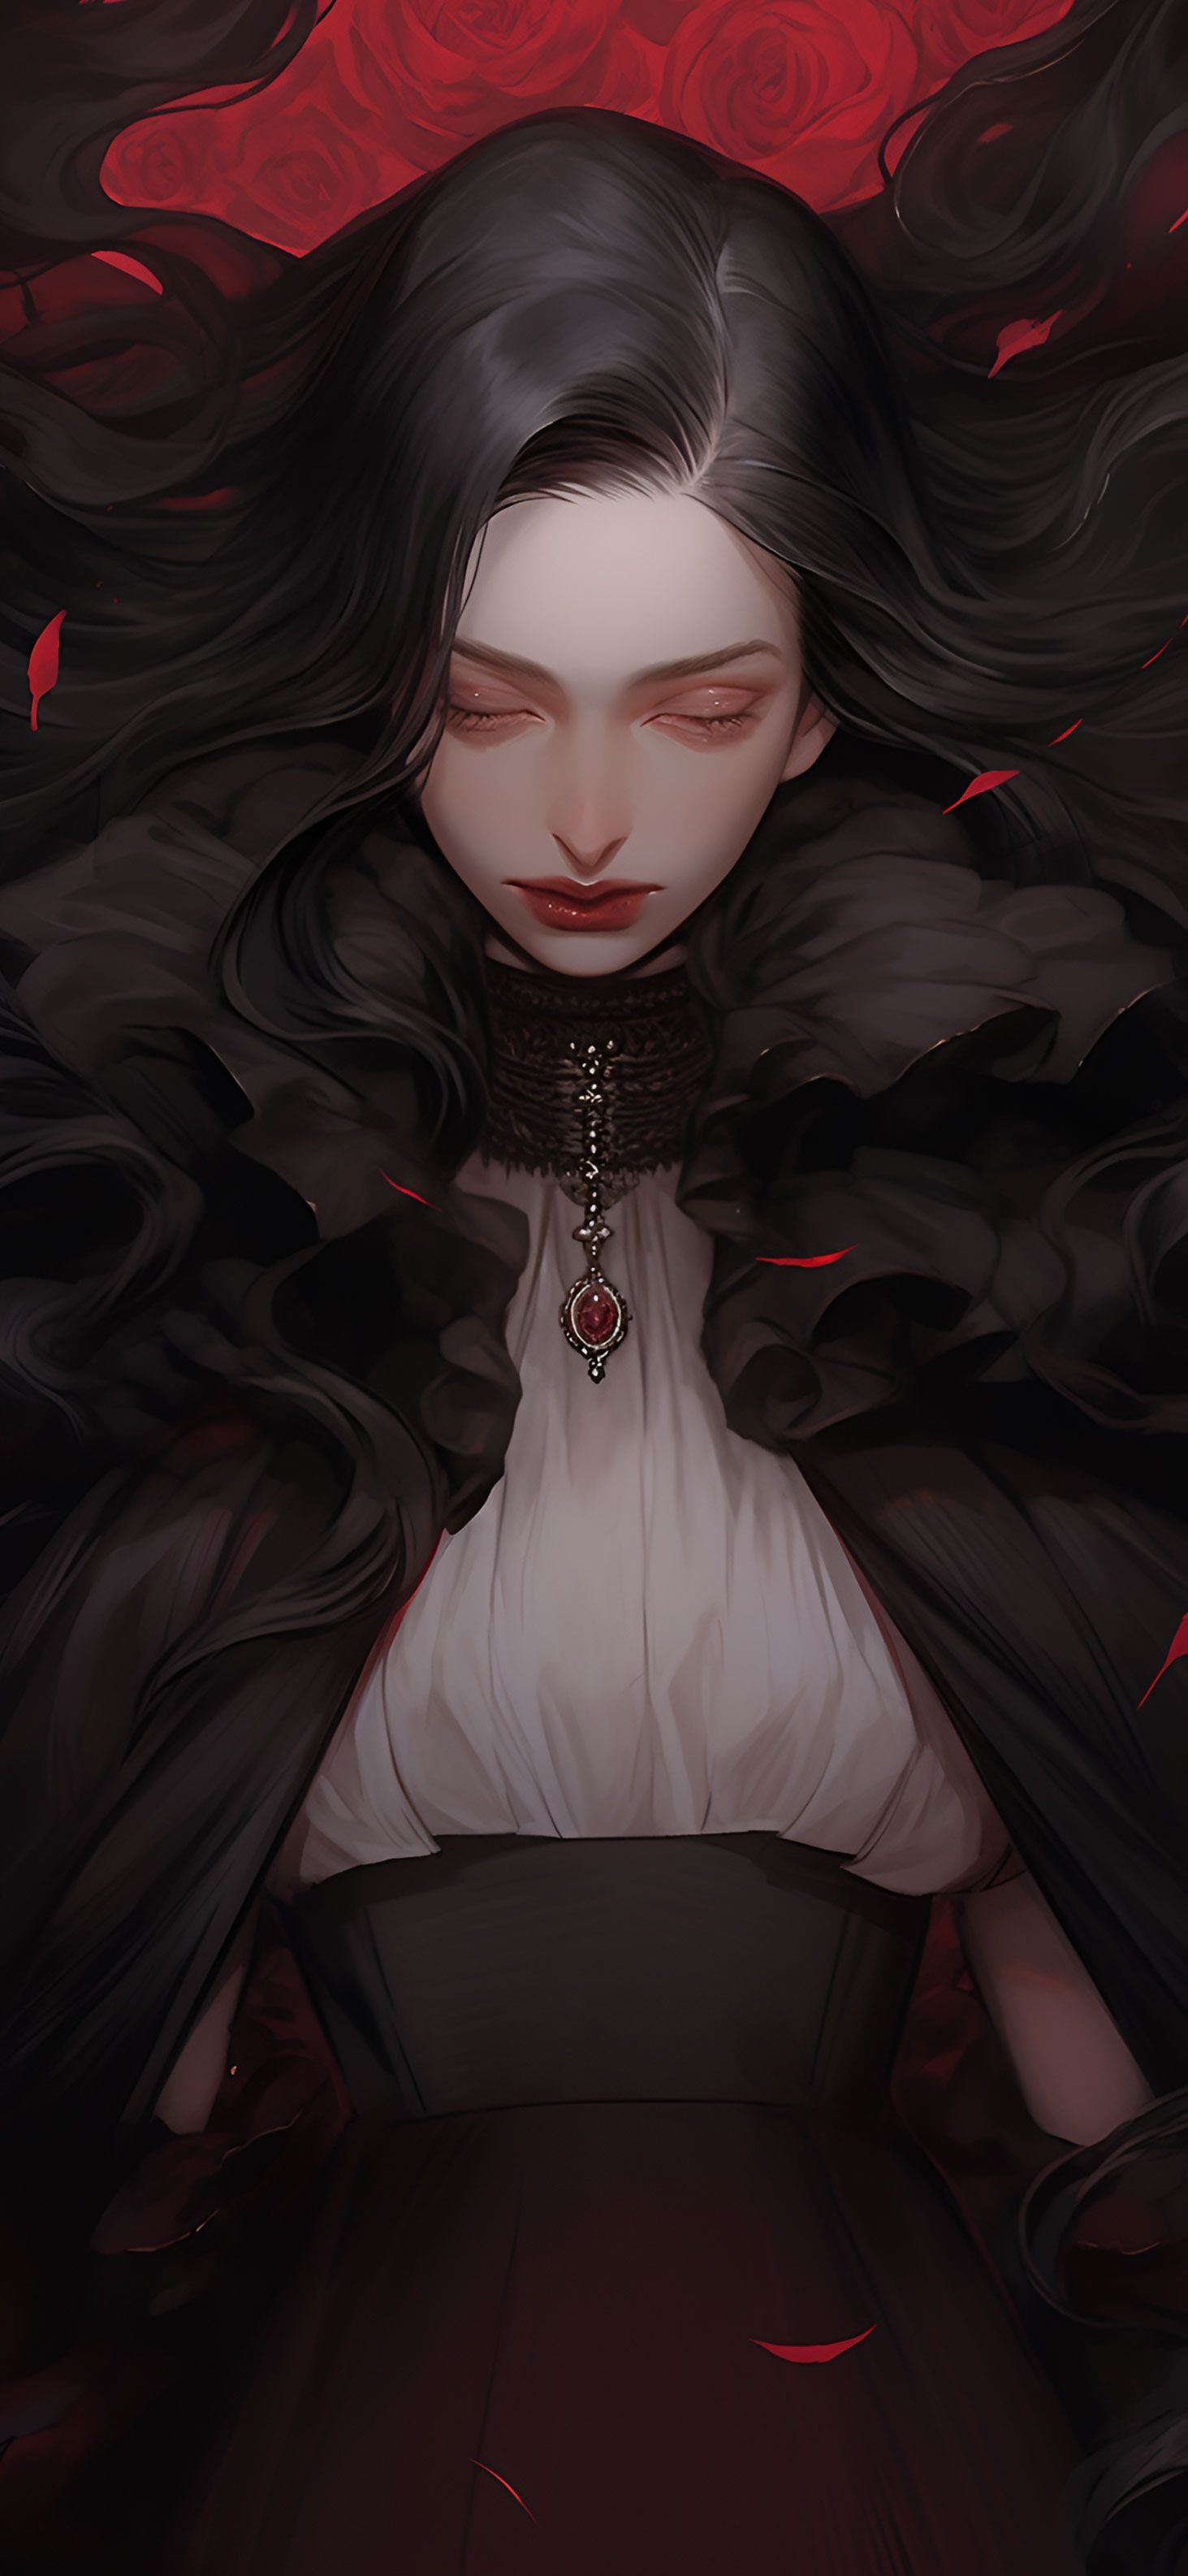 A woman with black hair and long red locks - Vampire